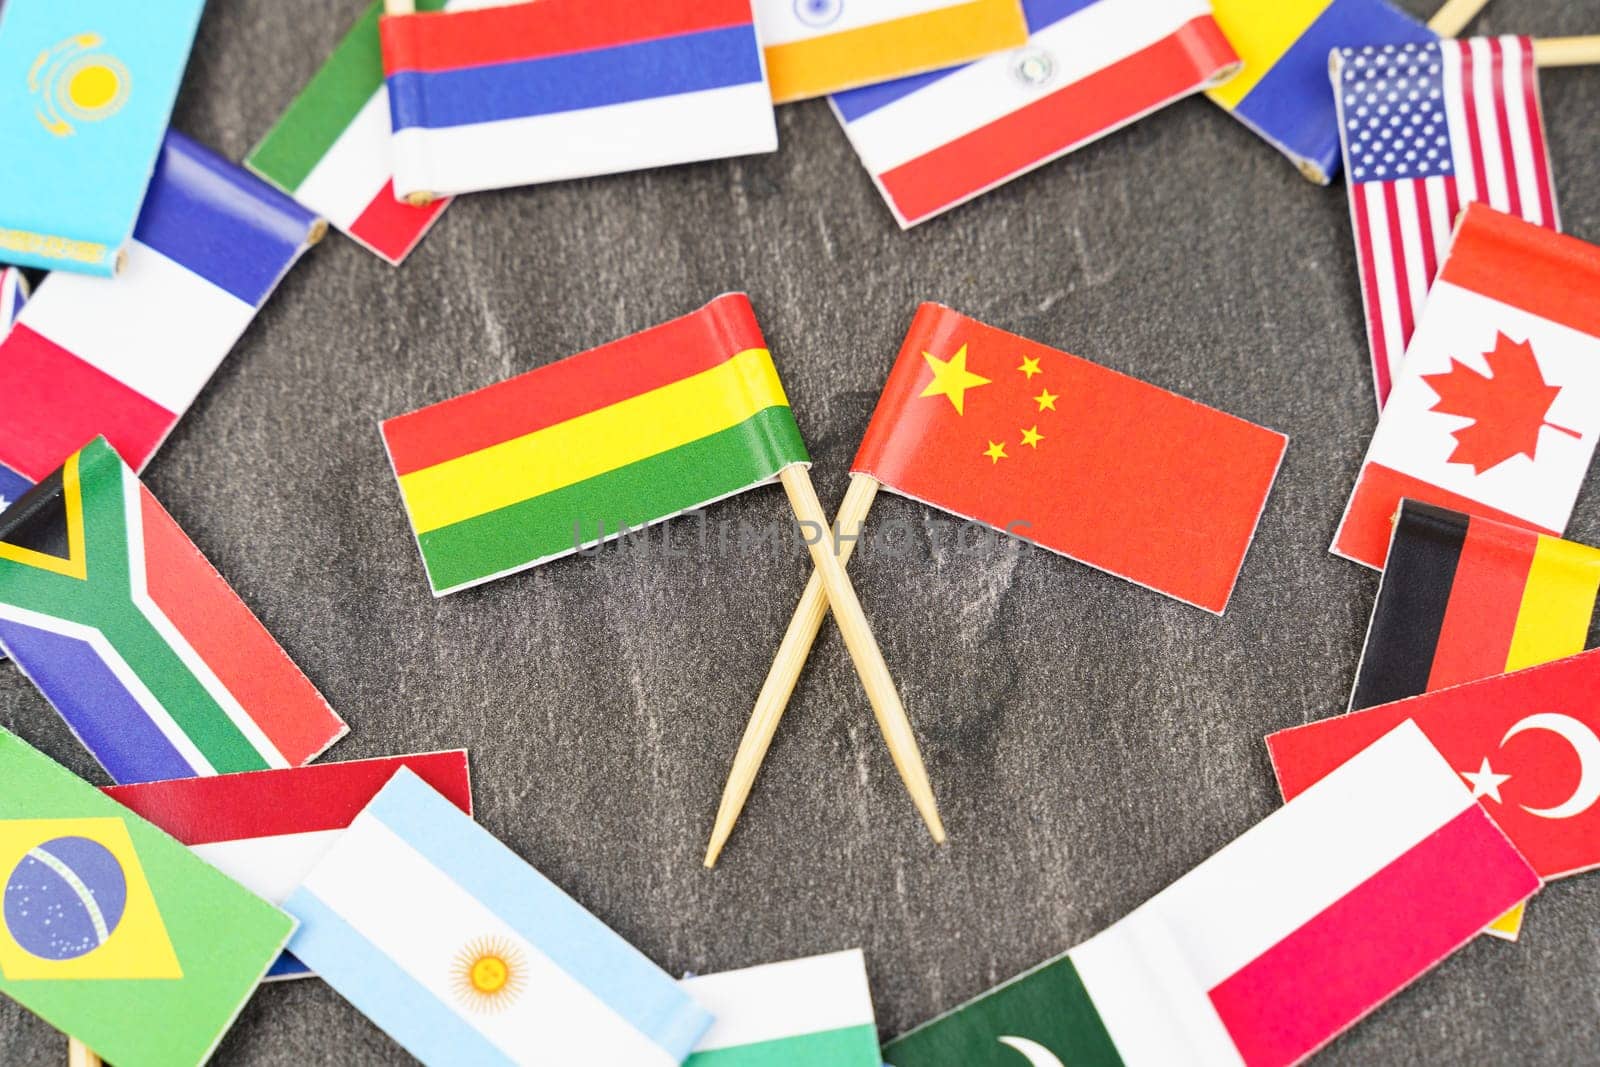 Policy. National flags of different countries. The concept is diplomacy. In the middle among the various flags are two flags - China, Lithuania